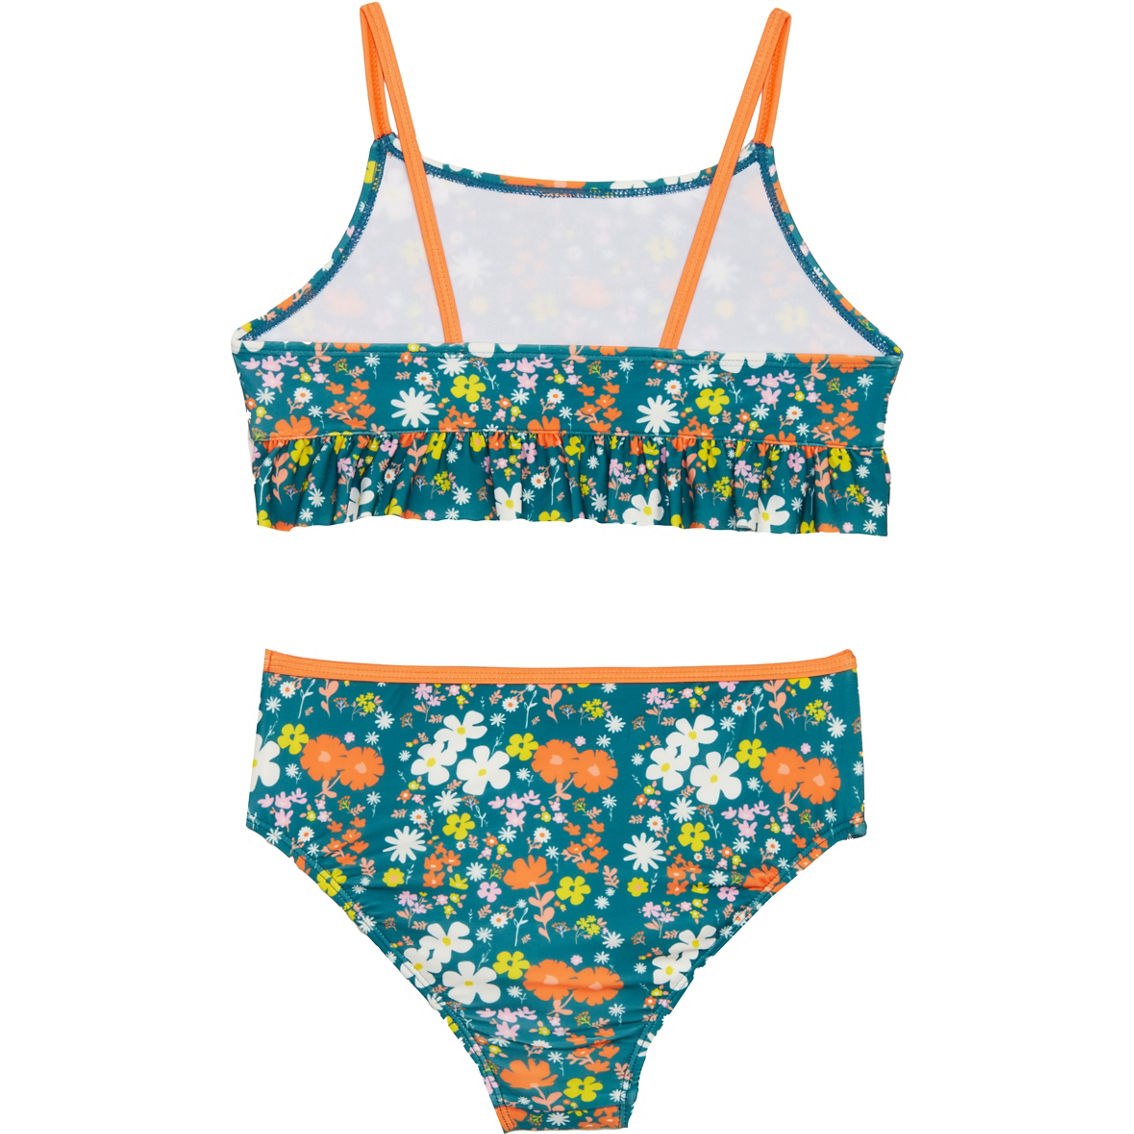 Surf Zone Girls Floral 2 pc. Swimsuit - Image 2 of 2